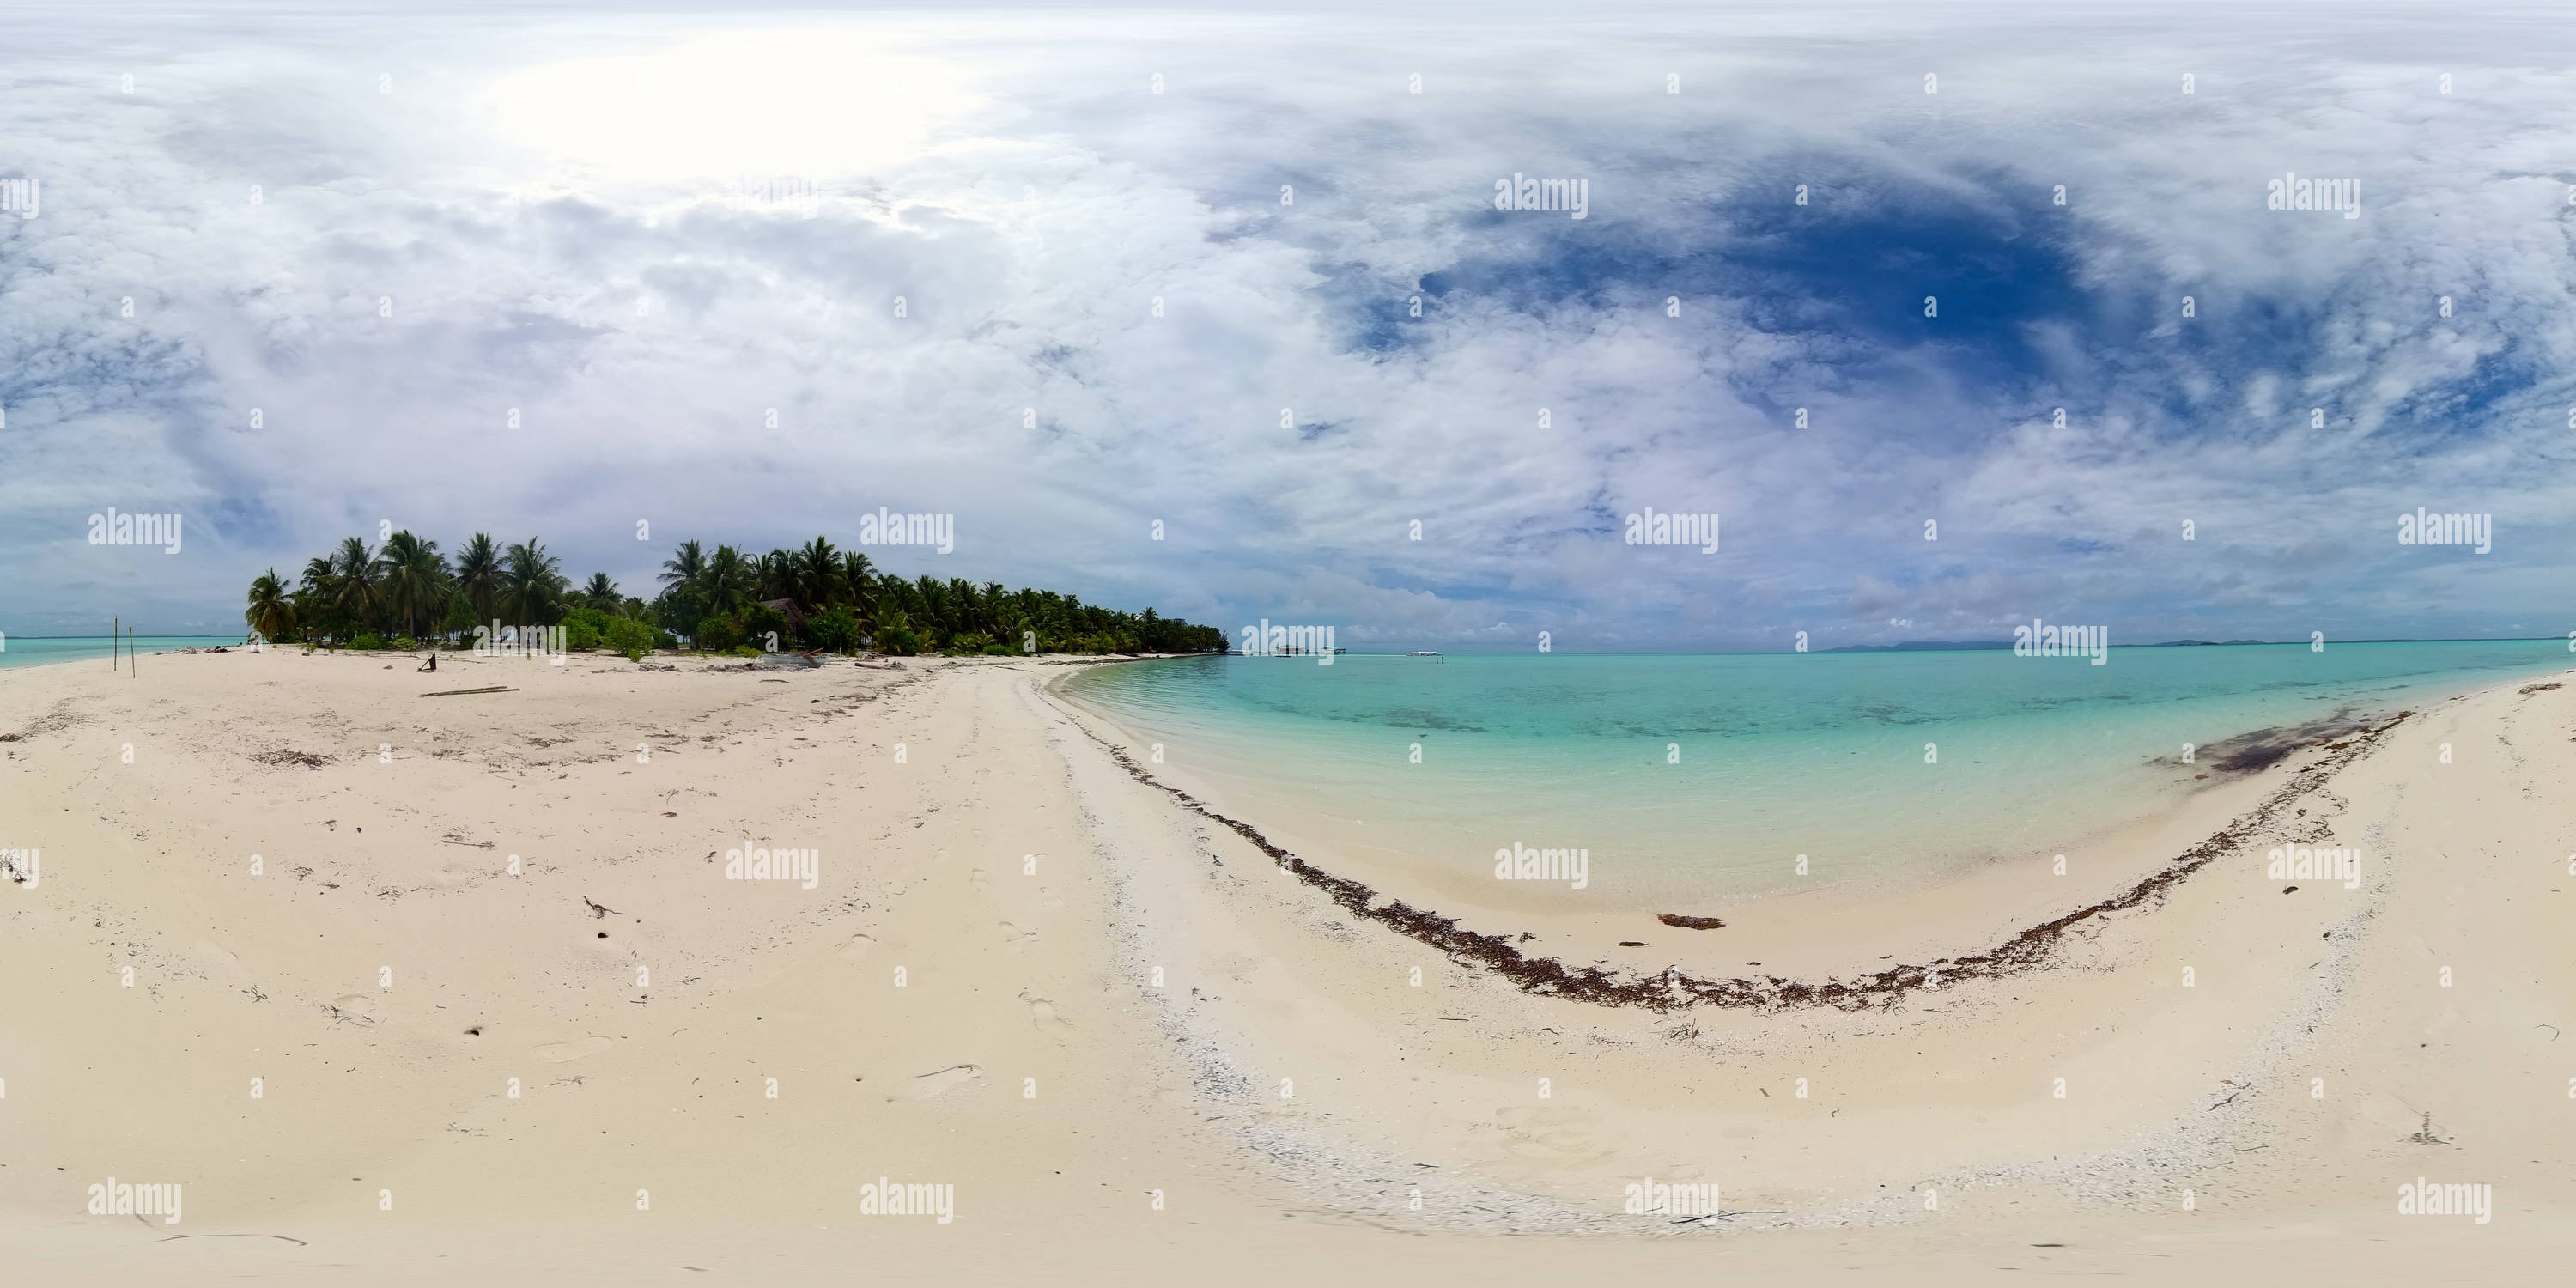 360 degree panoramic view of Tropical beach with palm trees. Virtual Reality 360.